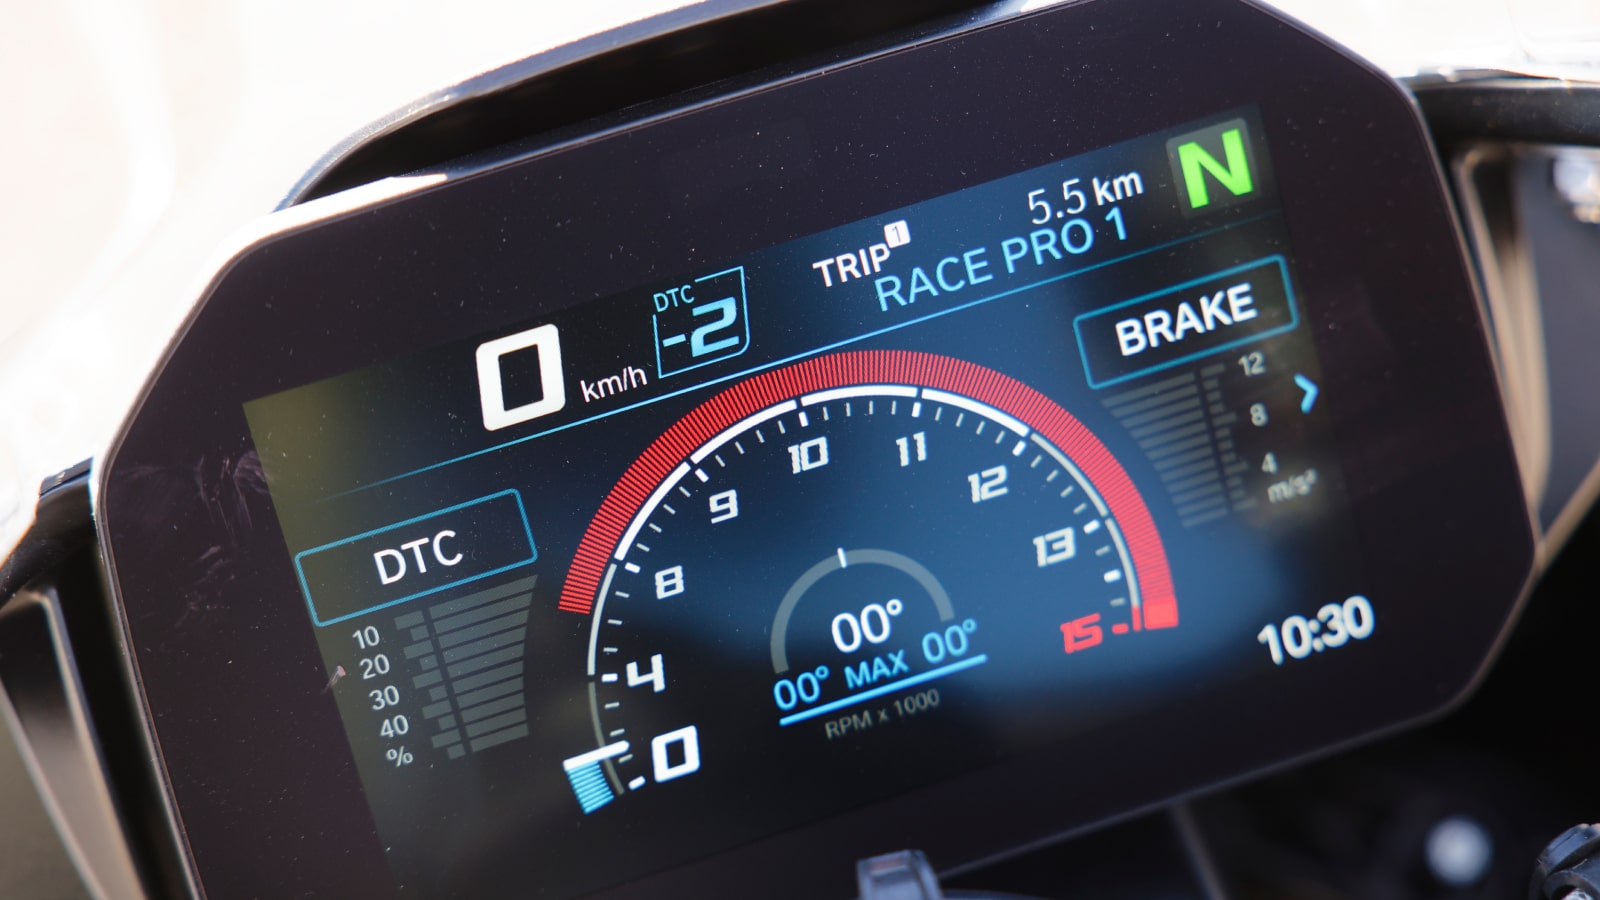 BMW S1000RR Digital Interface race pro mode showing alternative rev counter and lean angle